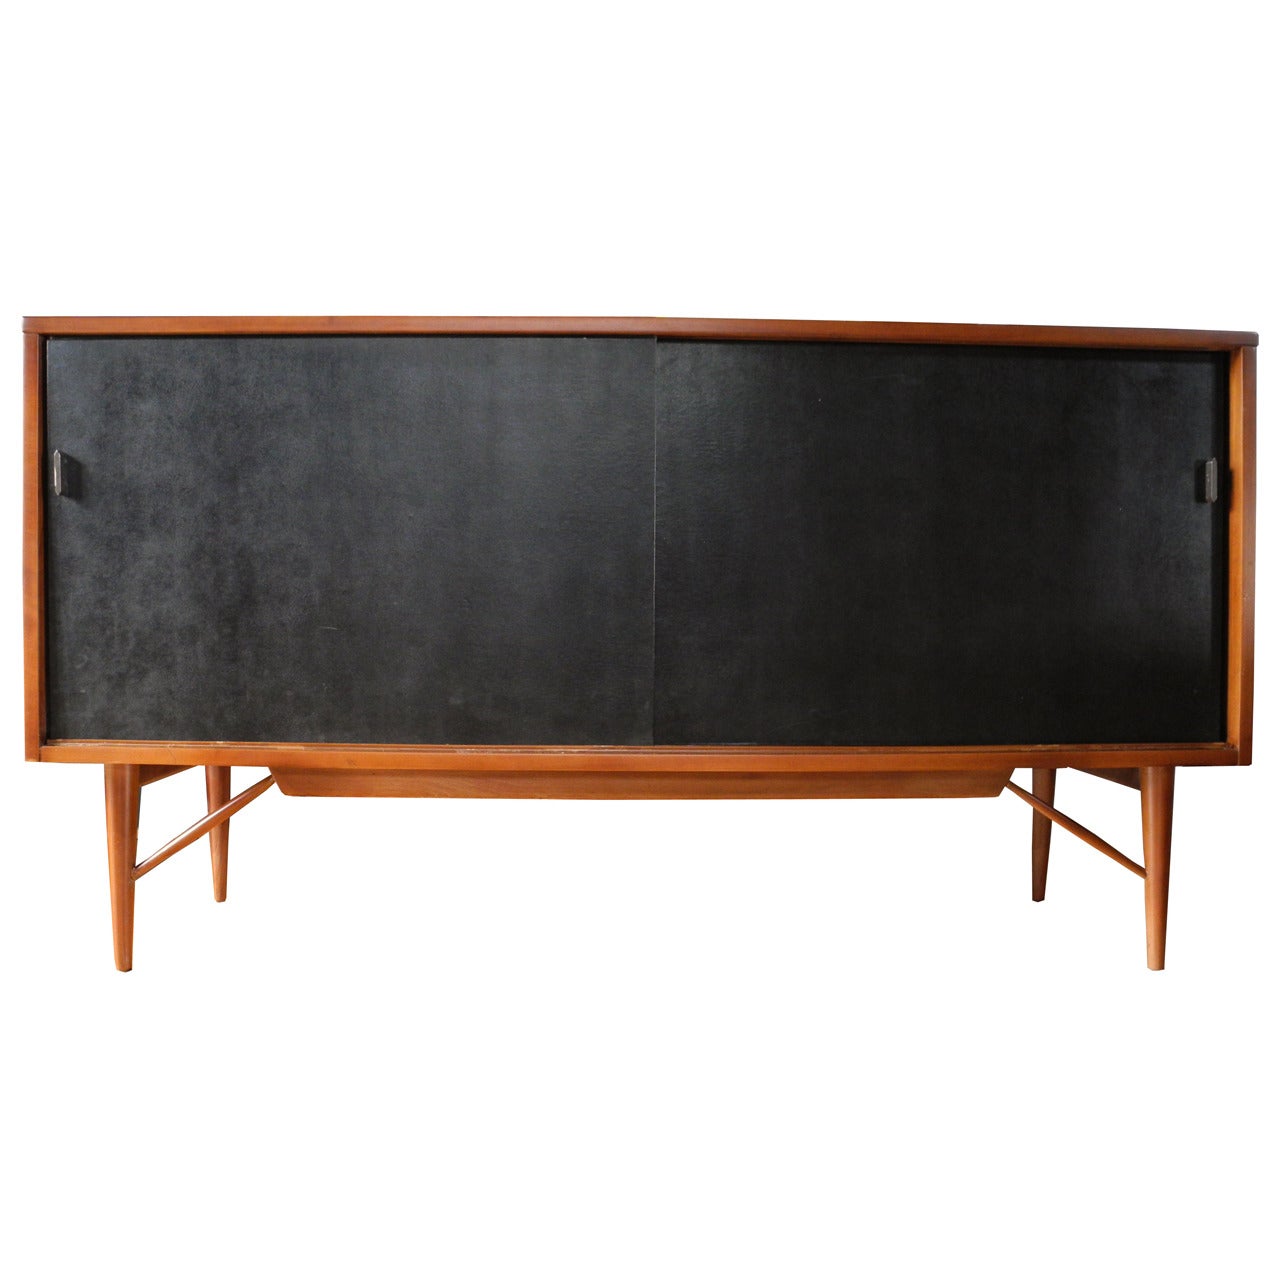 Solid Cherry Cabinet Sideboard or Credenza by Kipp Stewart for Winchendon